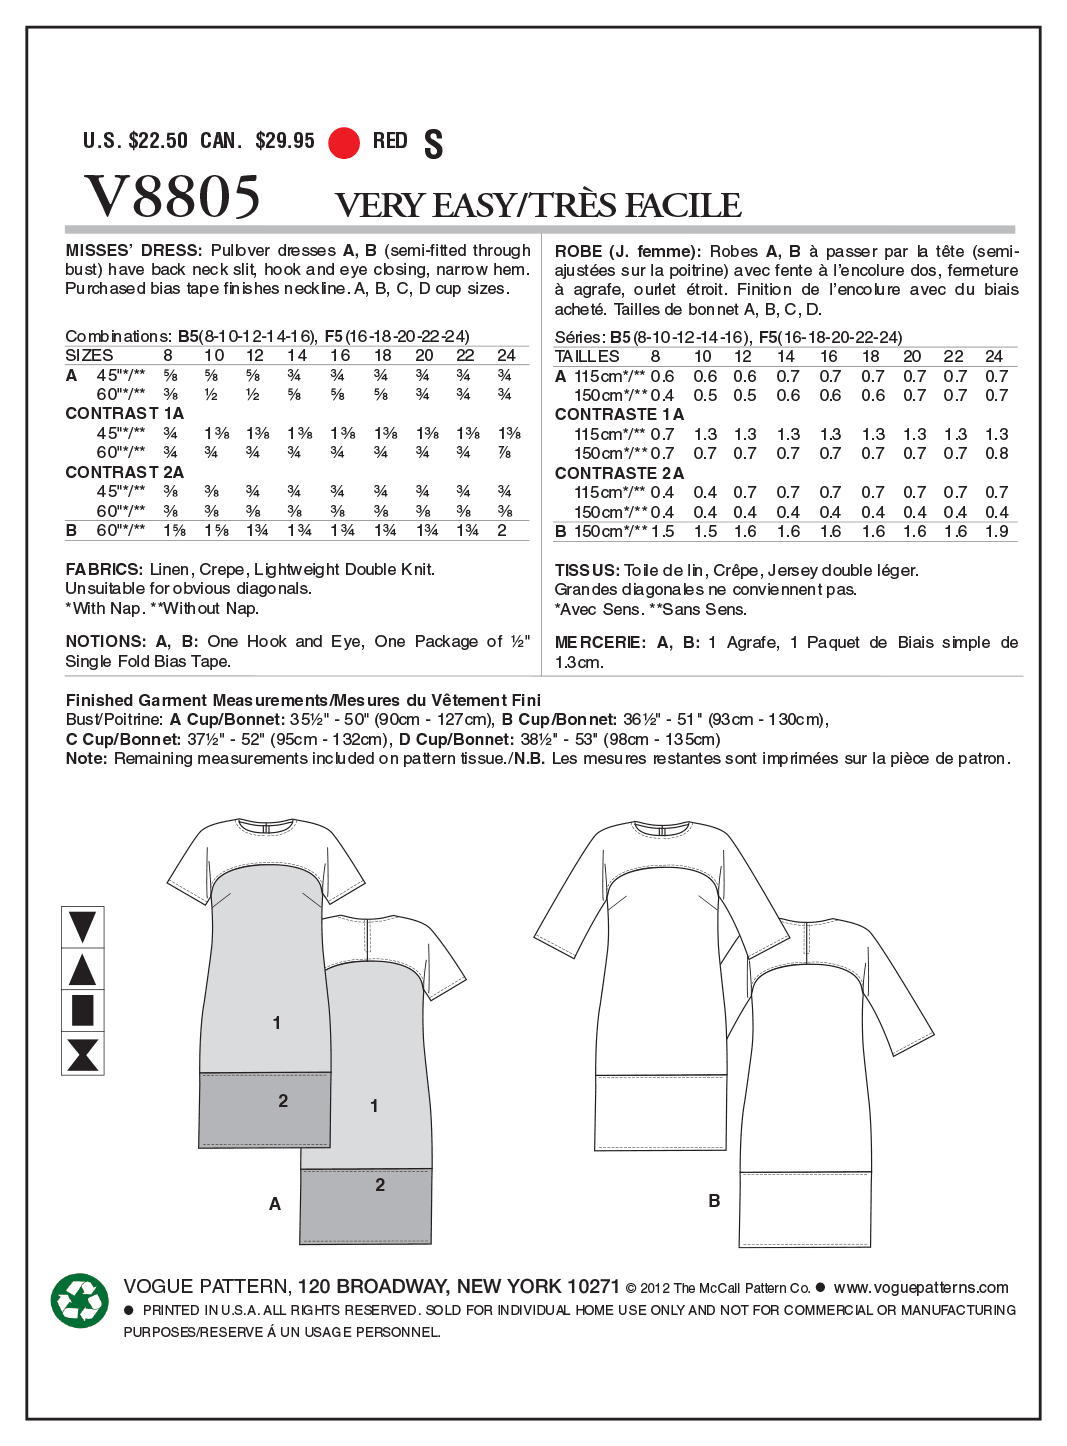 Vogue Pattern 8805 Misses' Dress | Very Easy from Jaycotts Sewing Supplies